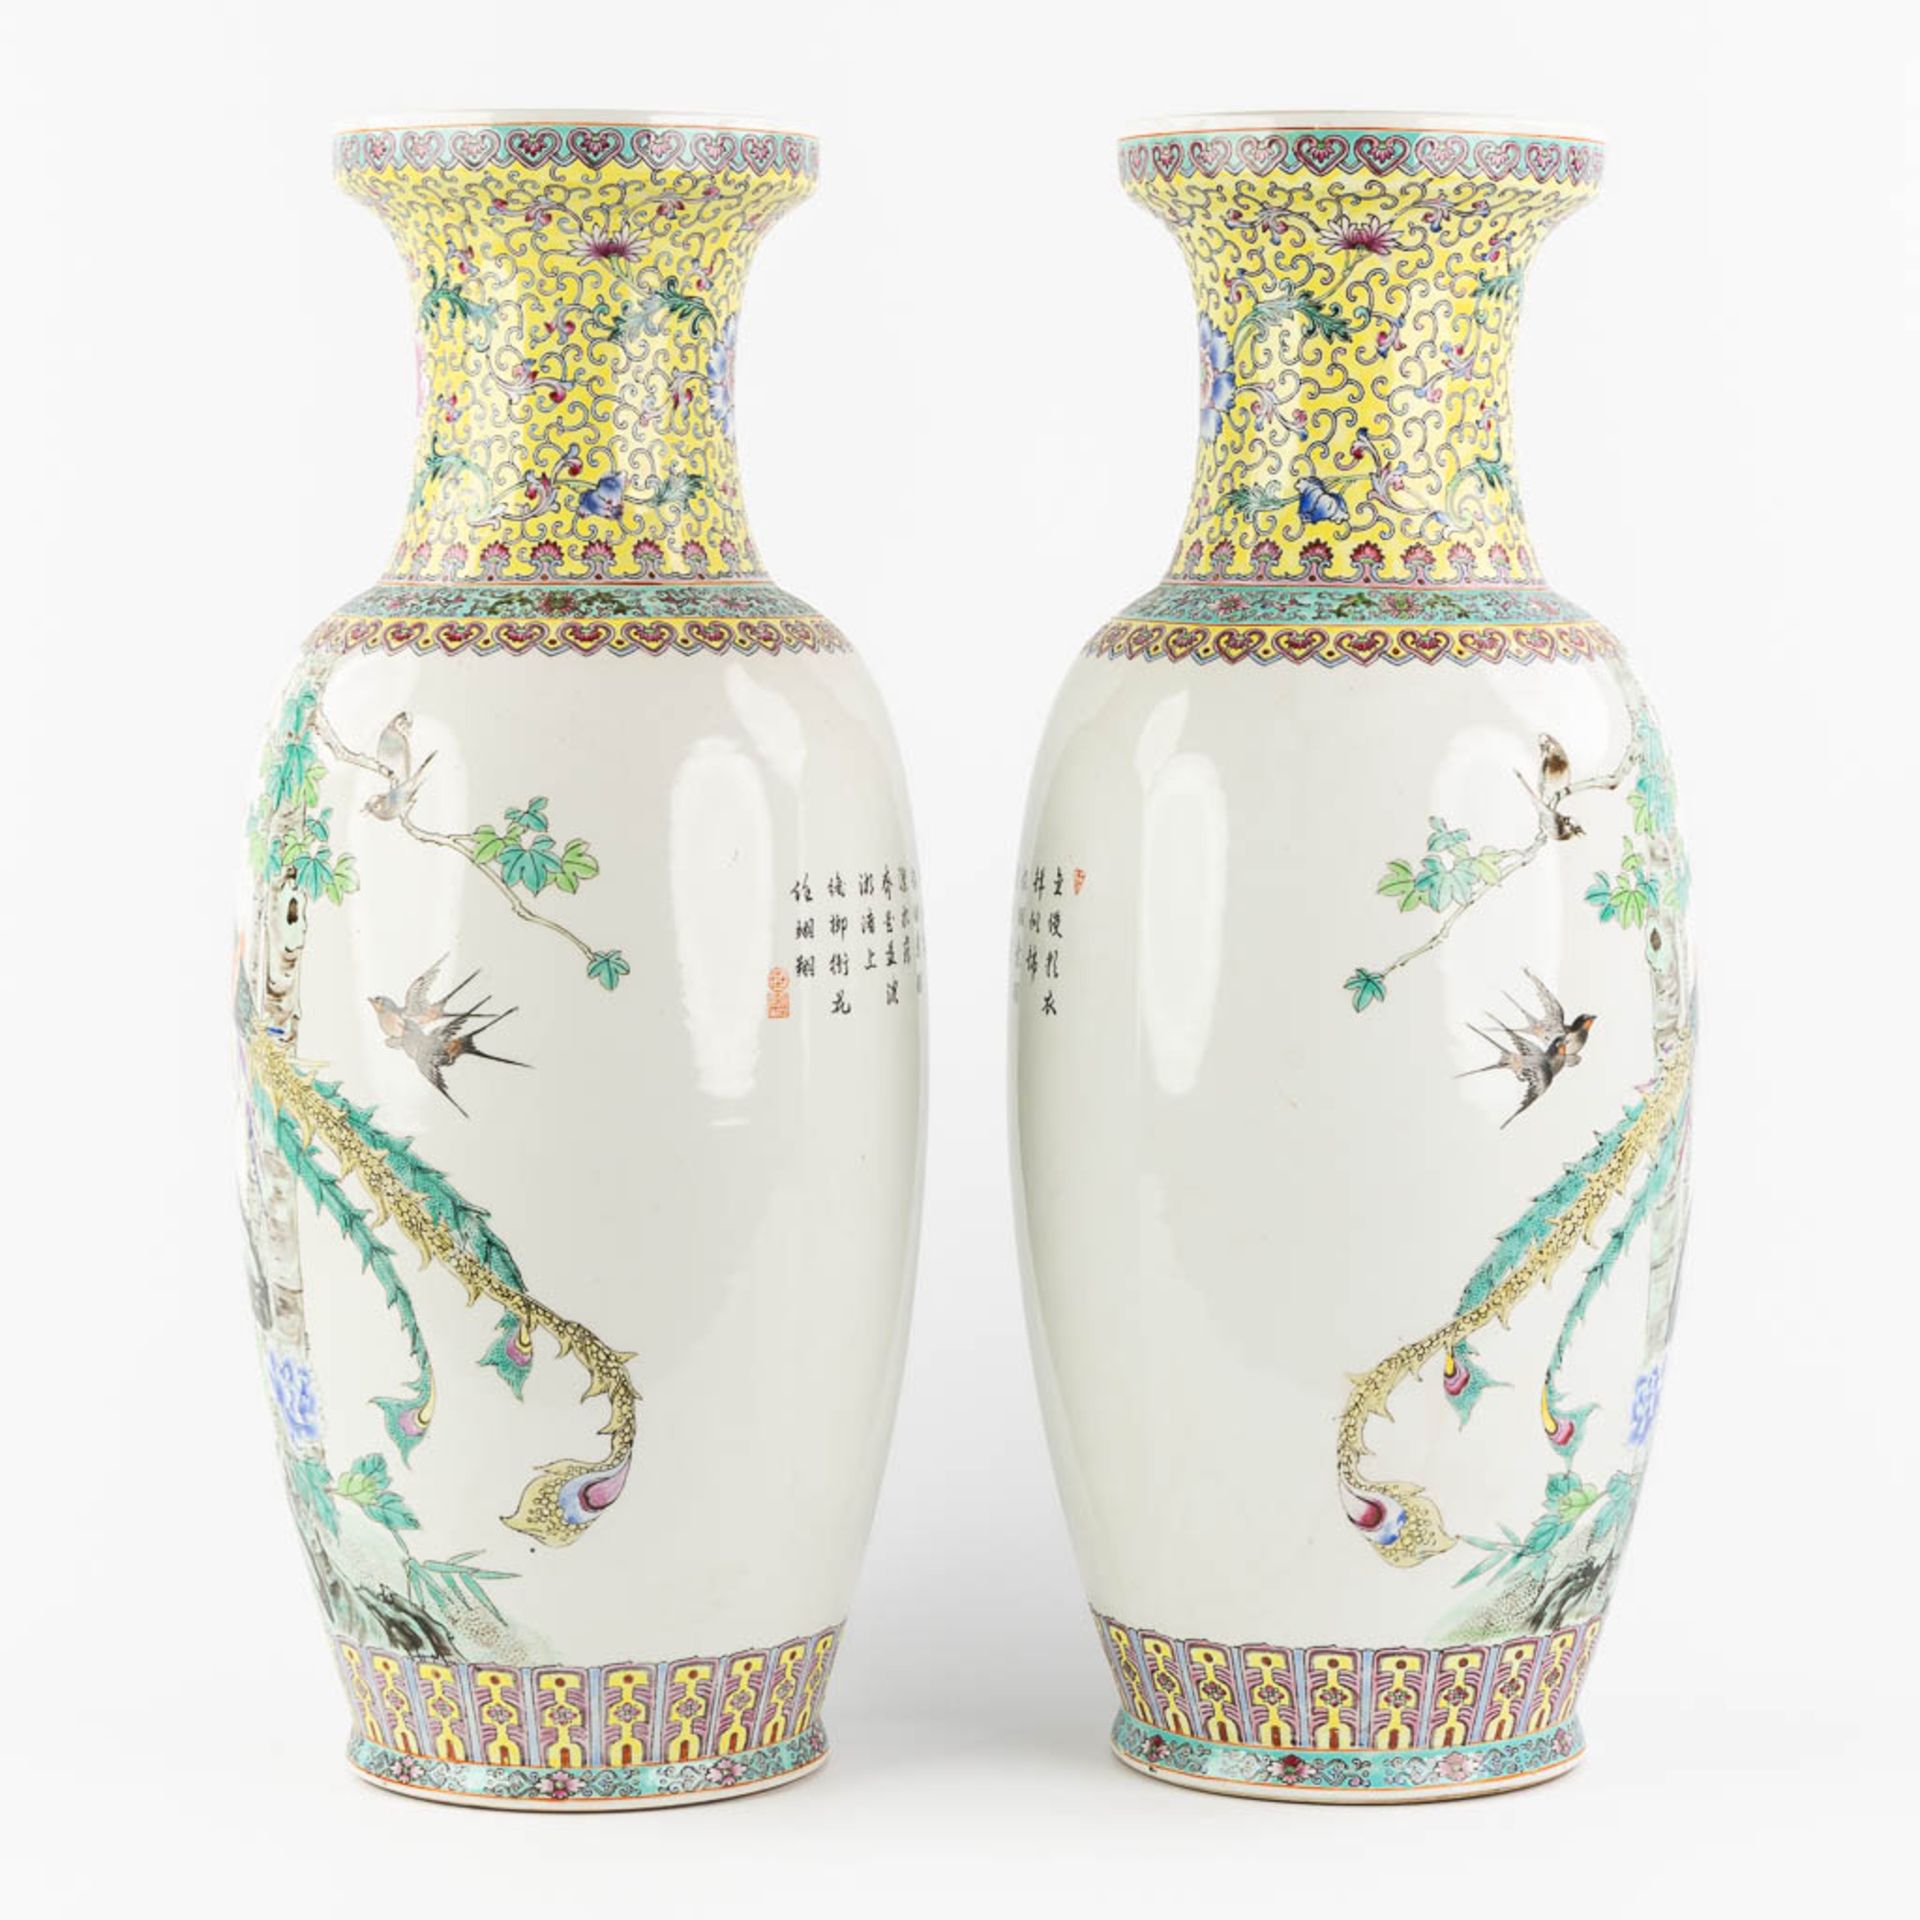 A decorative pair of Chinese vases with a Phoenix decor, 20th C. (H:62 x D:26 cm) - Image 6 of 16